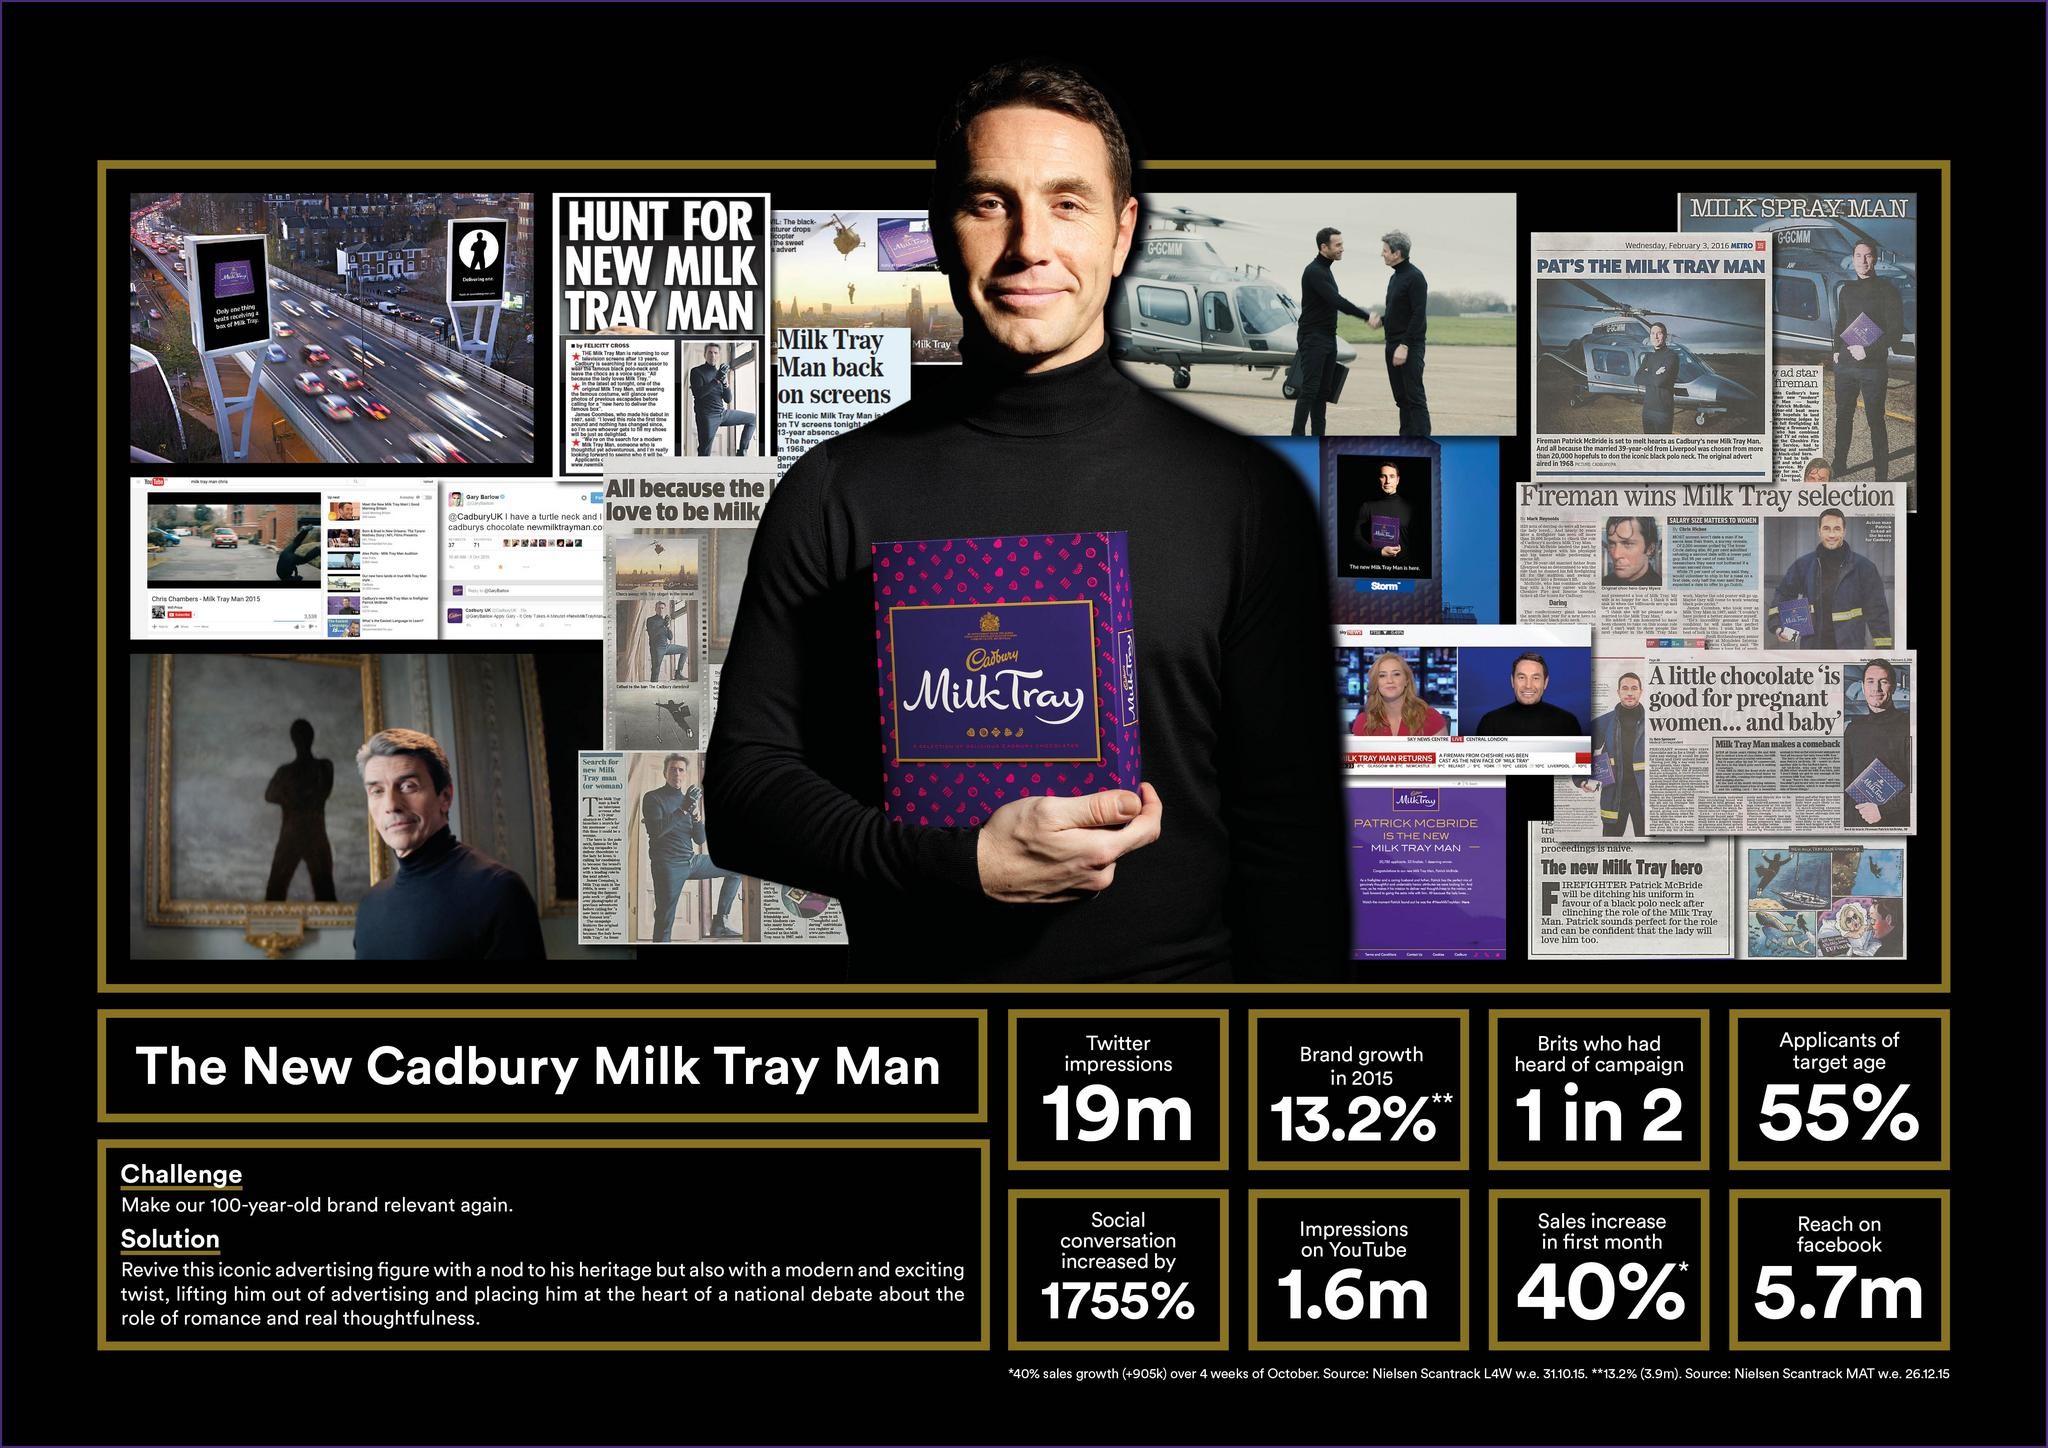 The Search for the New Cadbury Milk Tray Man